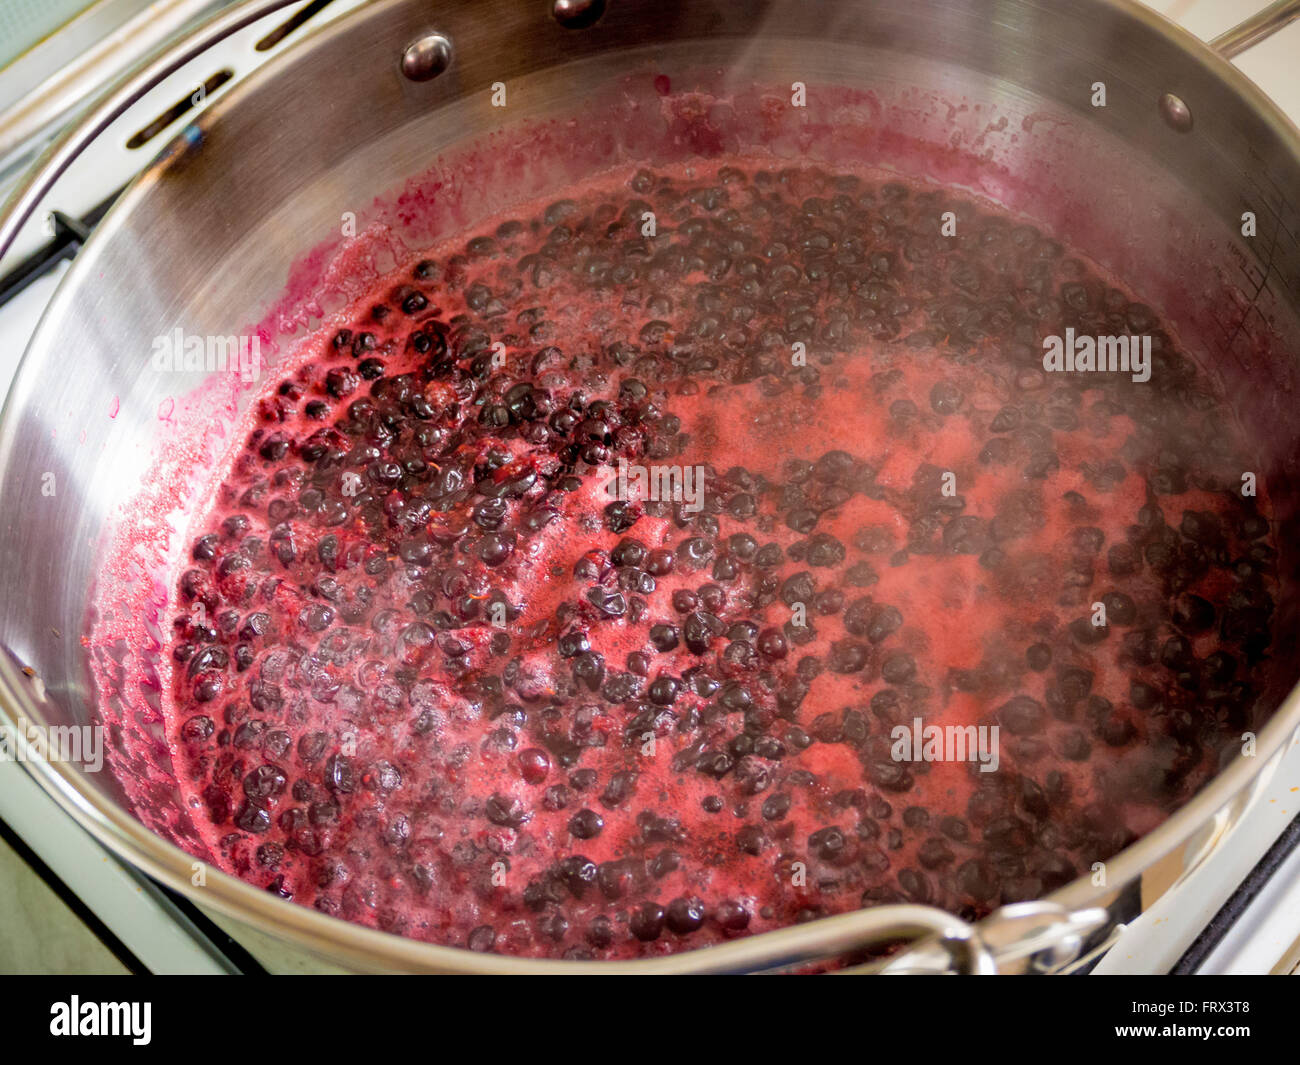 Jam Making at home - Blackcurrants in large Maslin Pan boiling on stove Stock Photo